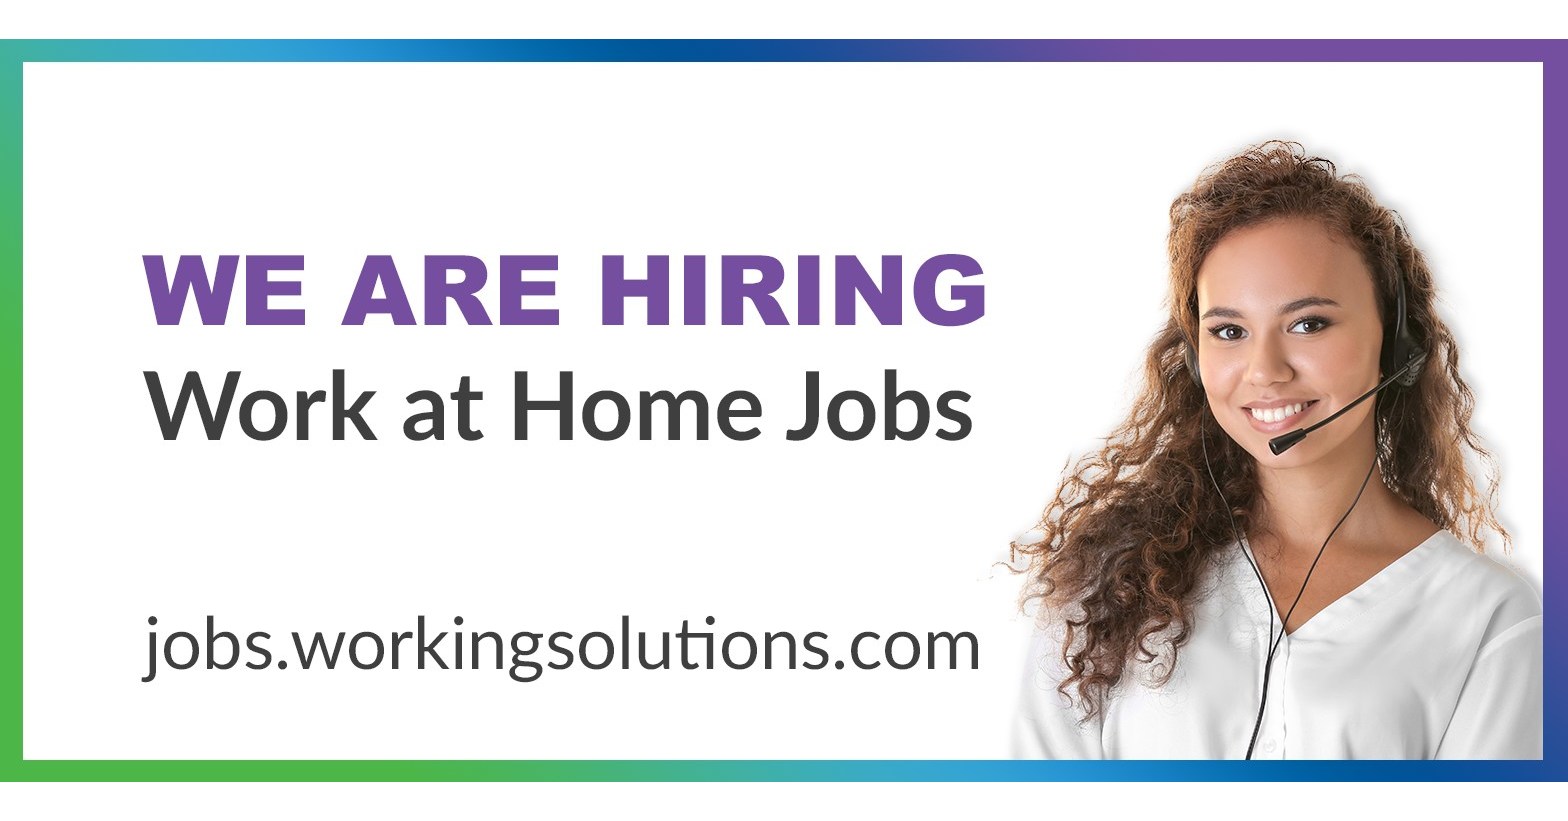 Working Solutions Hiring 1,000s for Holidays